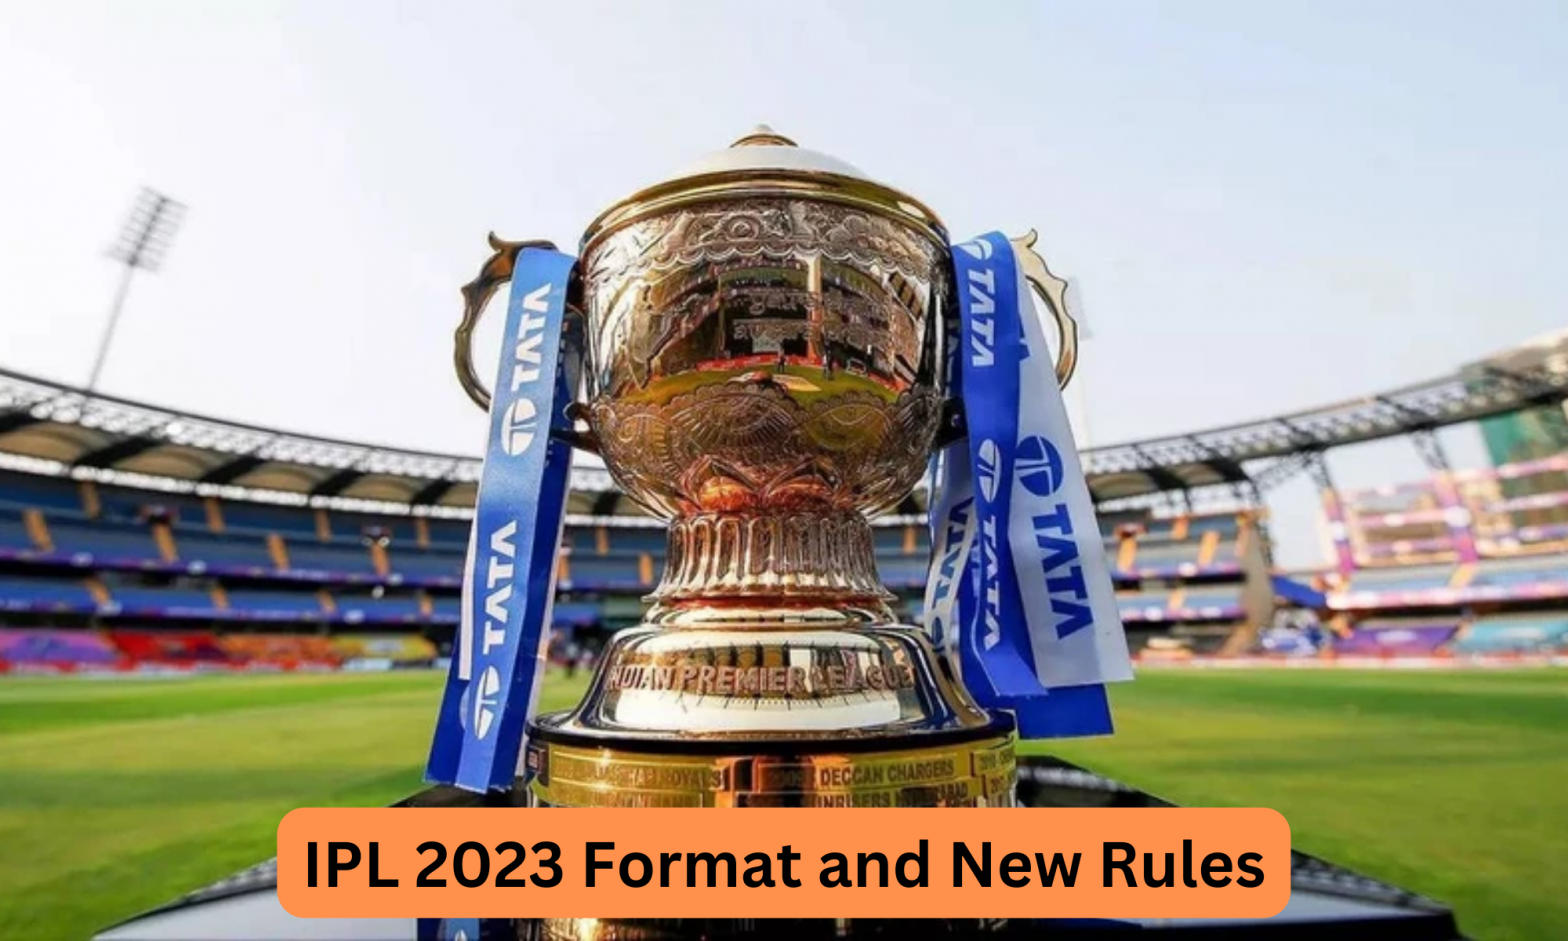 IPL 2023 Format and New Rules